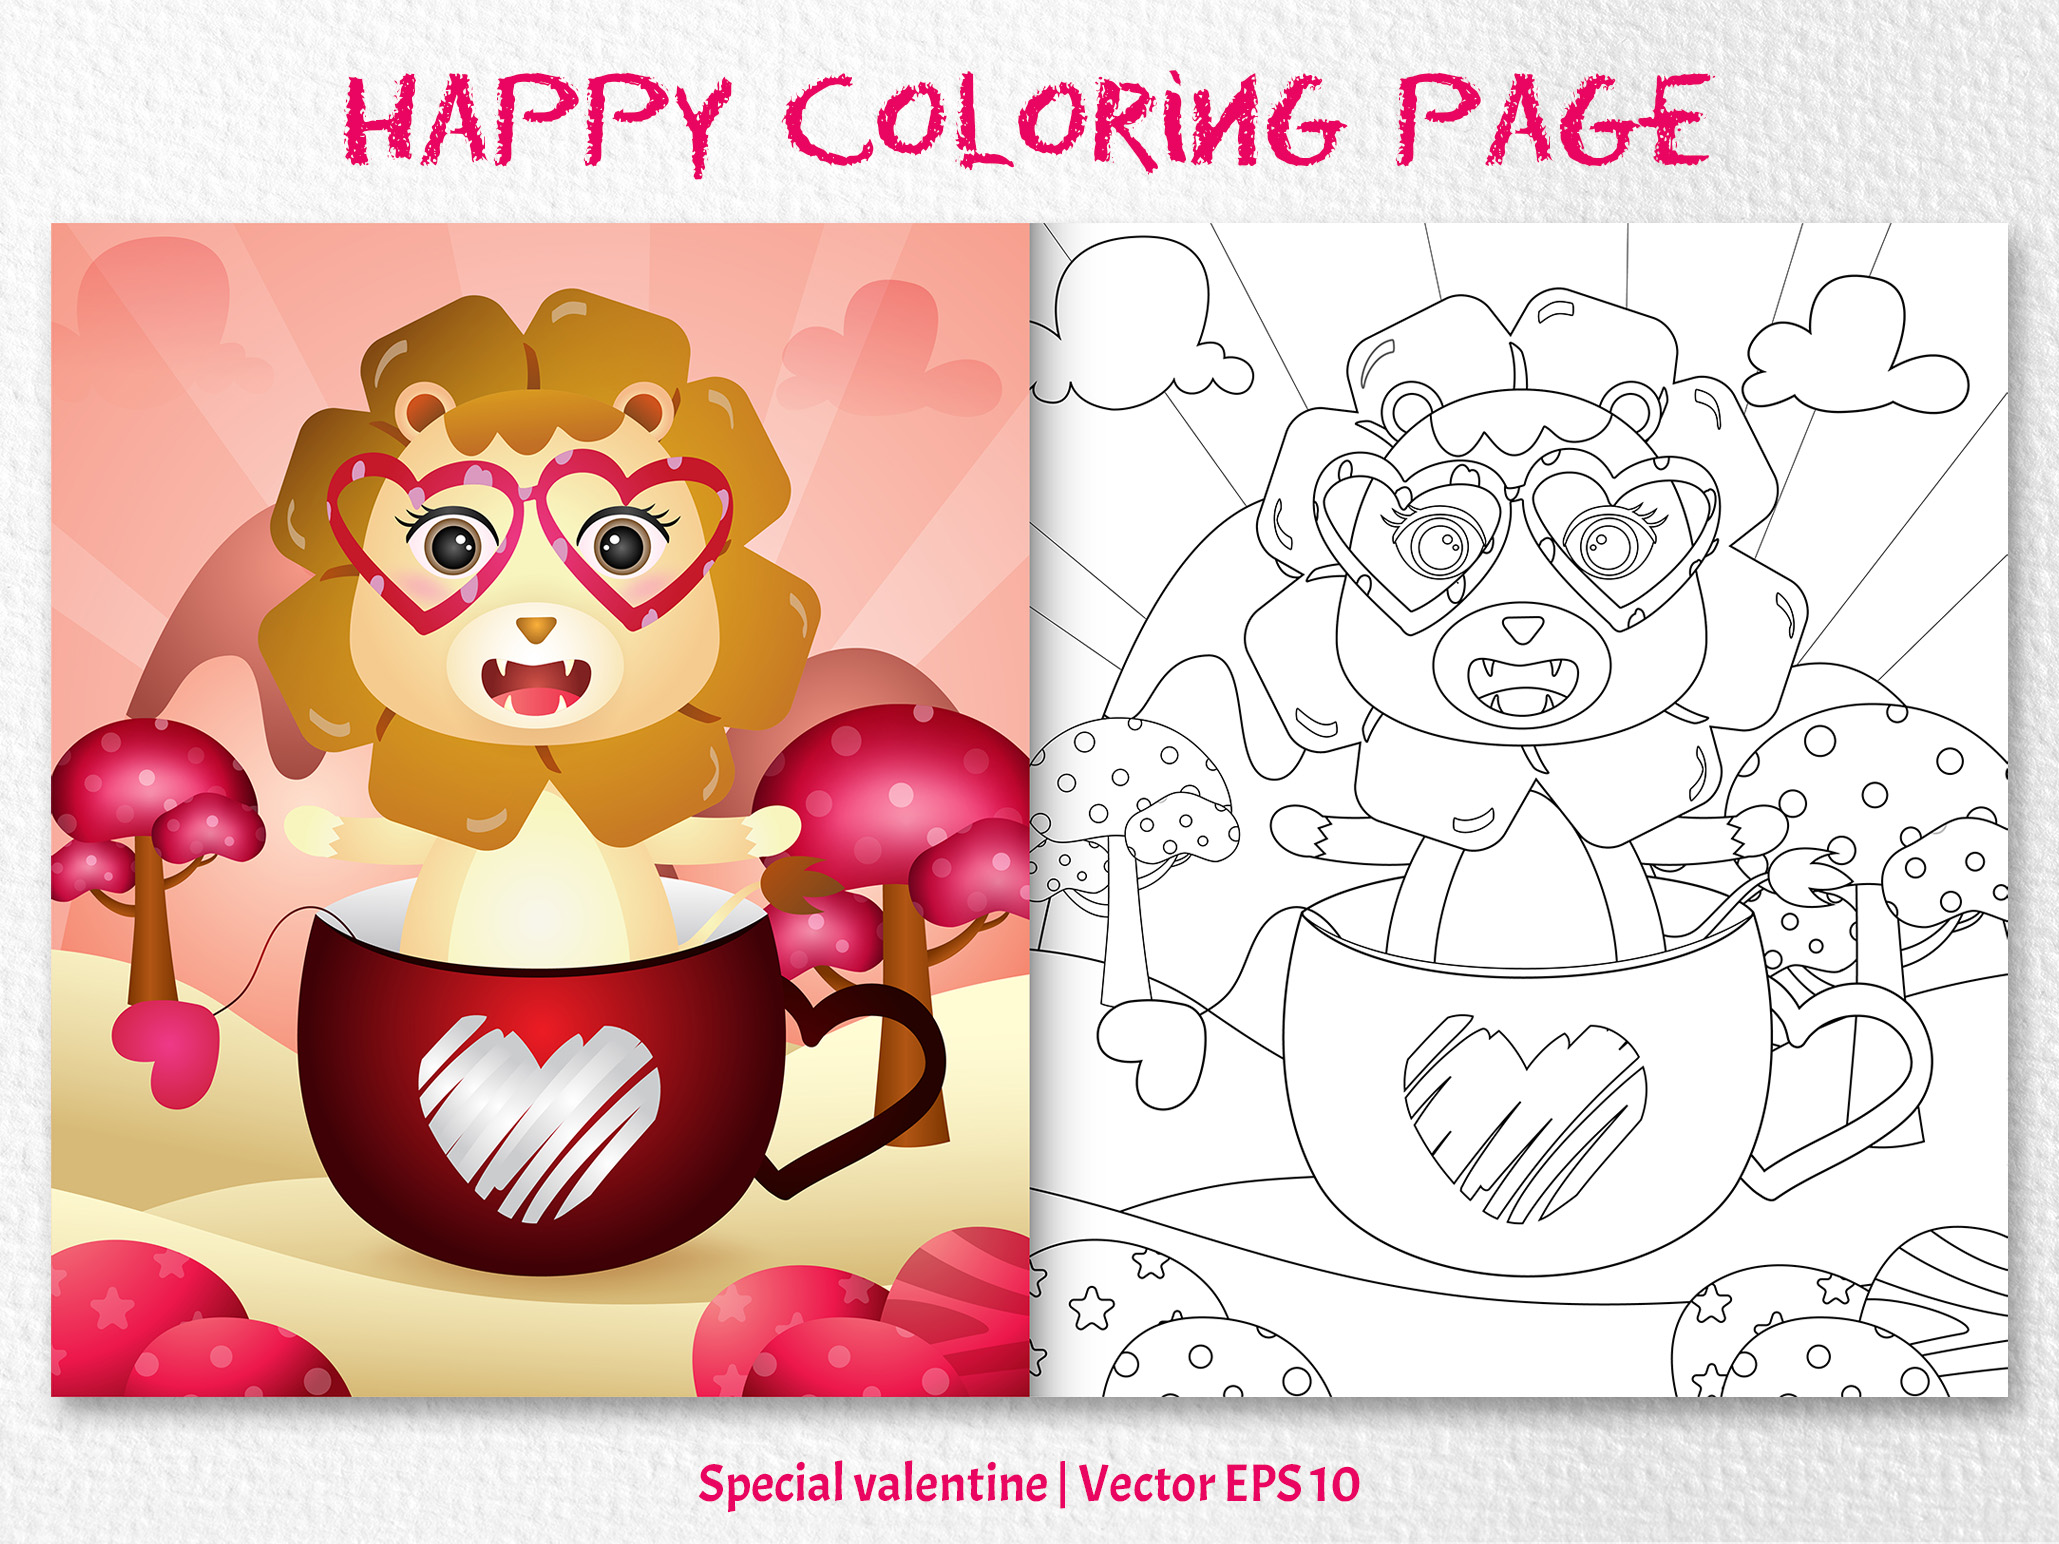 a-cute-lion-coloring-pages-graphic-graphic-by-wijayariko-creative